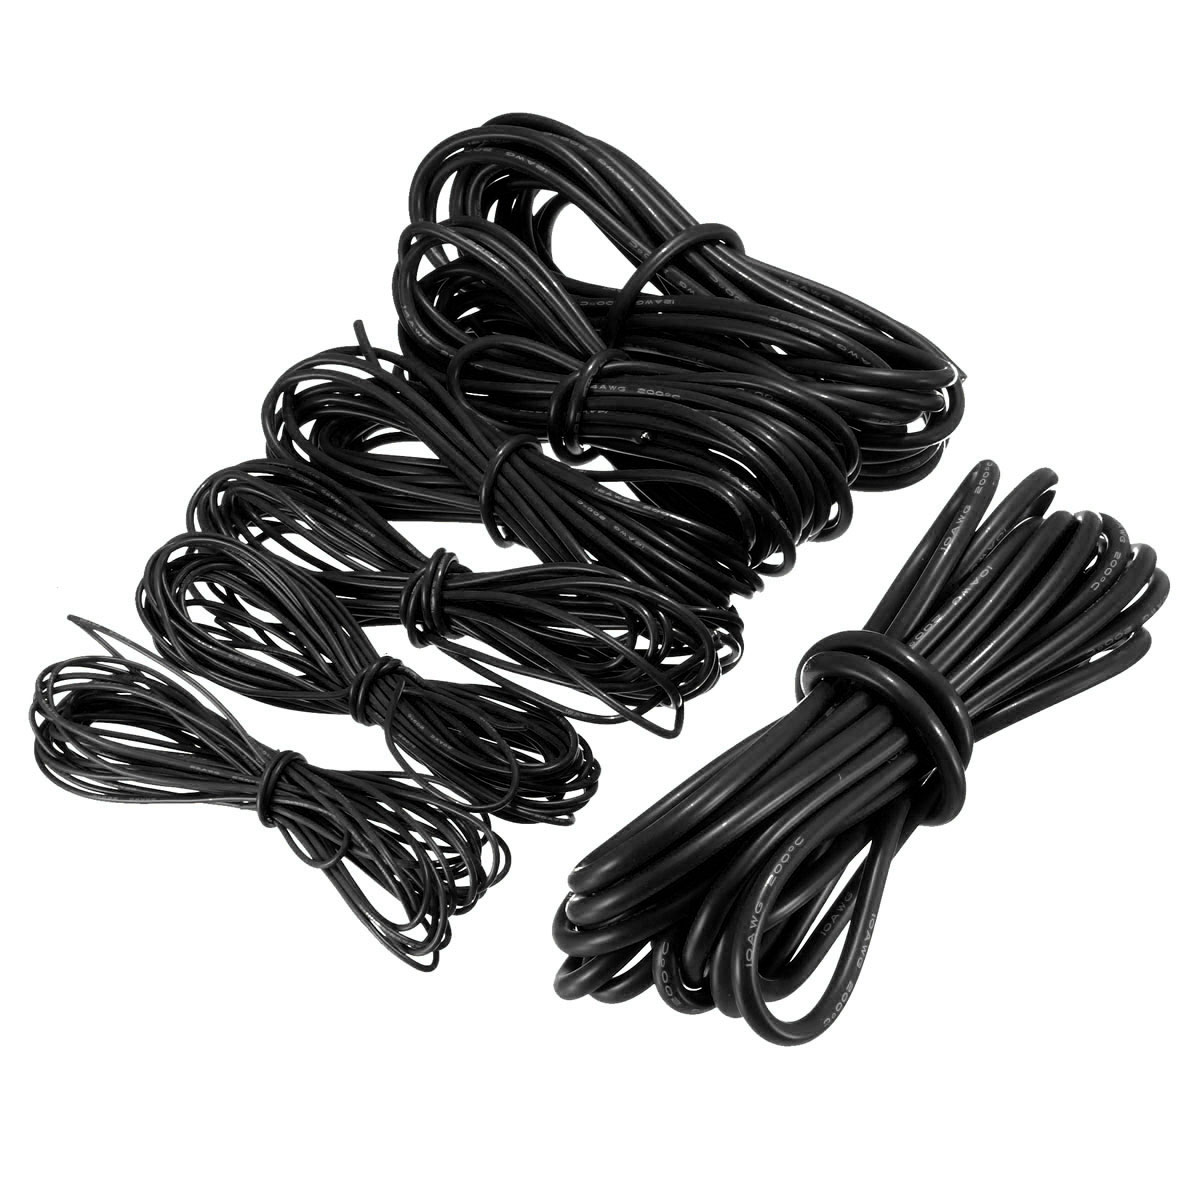 DANIU-5-Meter-Black-Silicone-Wire-Cable-10121416182022AWG-Flexible-Cable-1170293-1